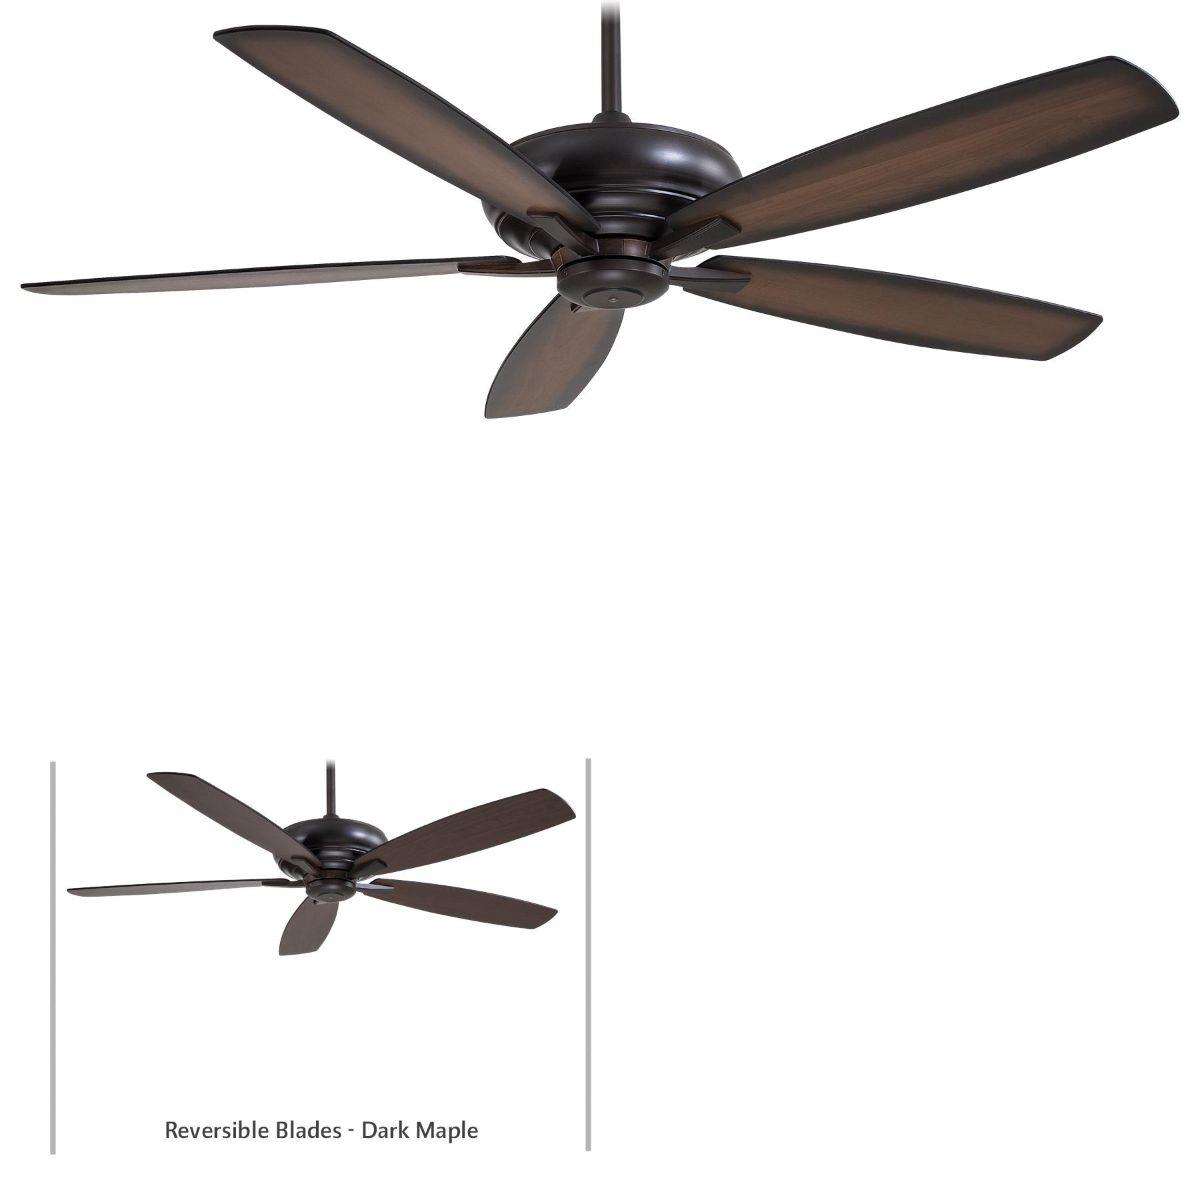 Kola XL 60 Inch Ceiling Fan With Remote, Kocoa with Toned Med Maple/Dark Maple Blades - Bees Lighting